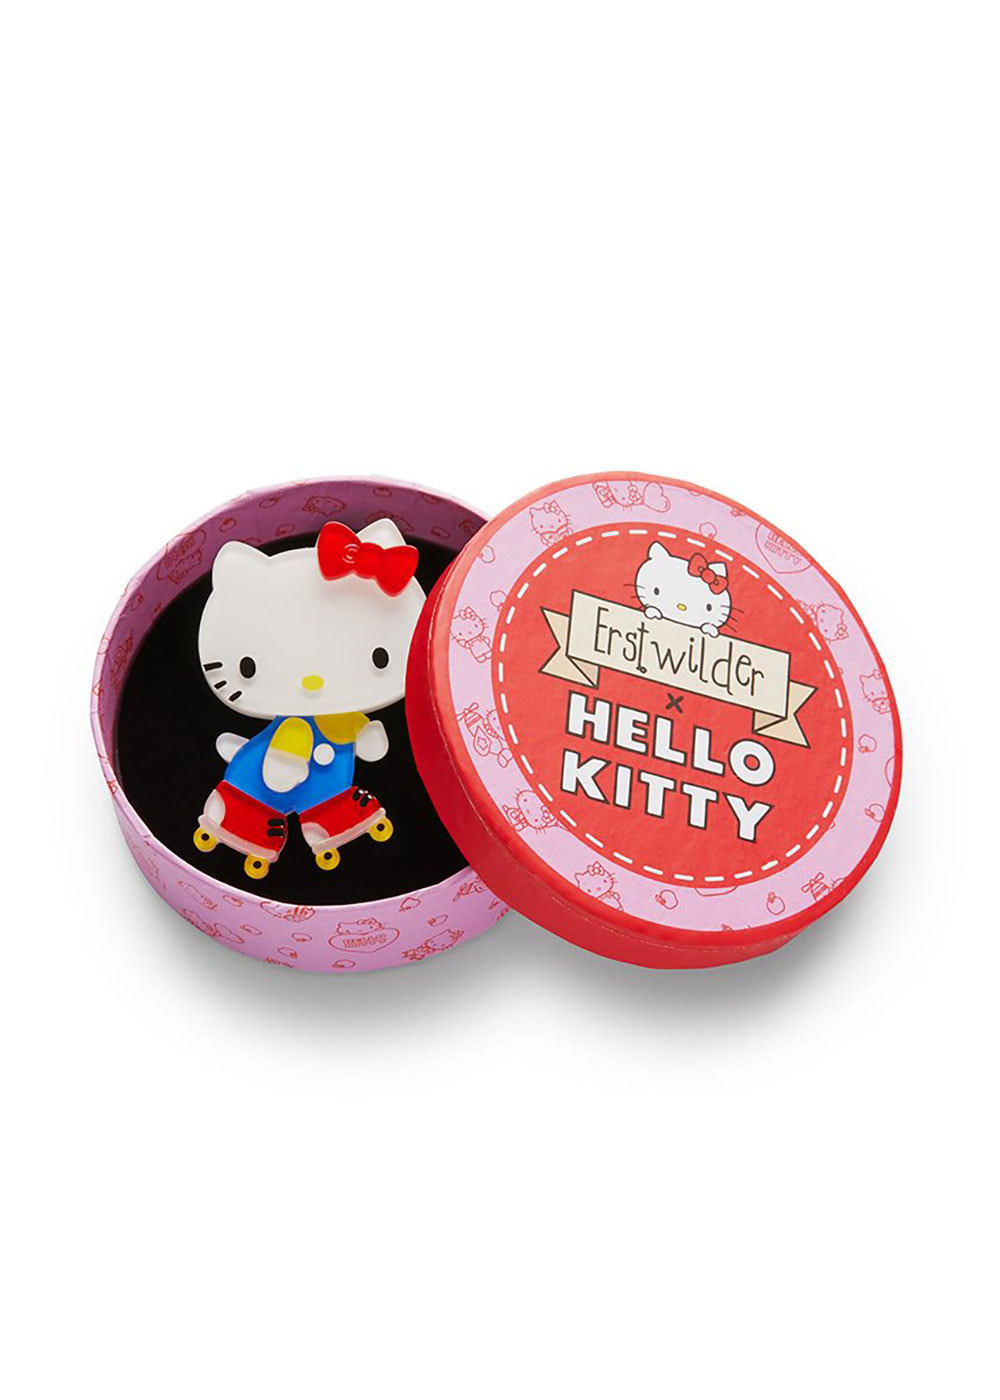 Erstwilder x Hello Kitty Brooch in Time for a Skate